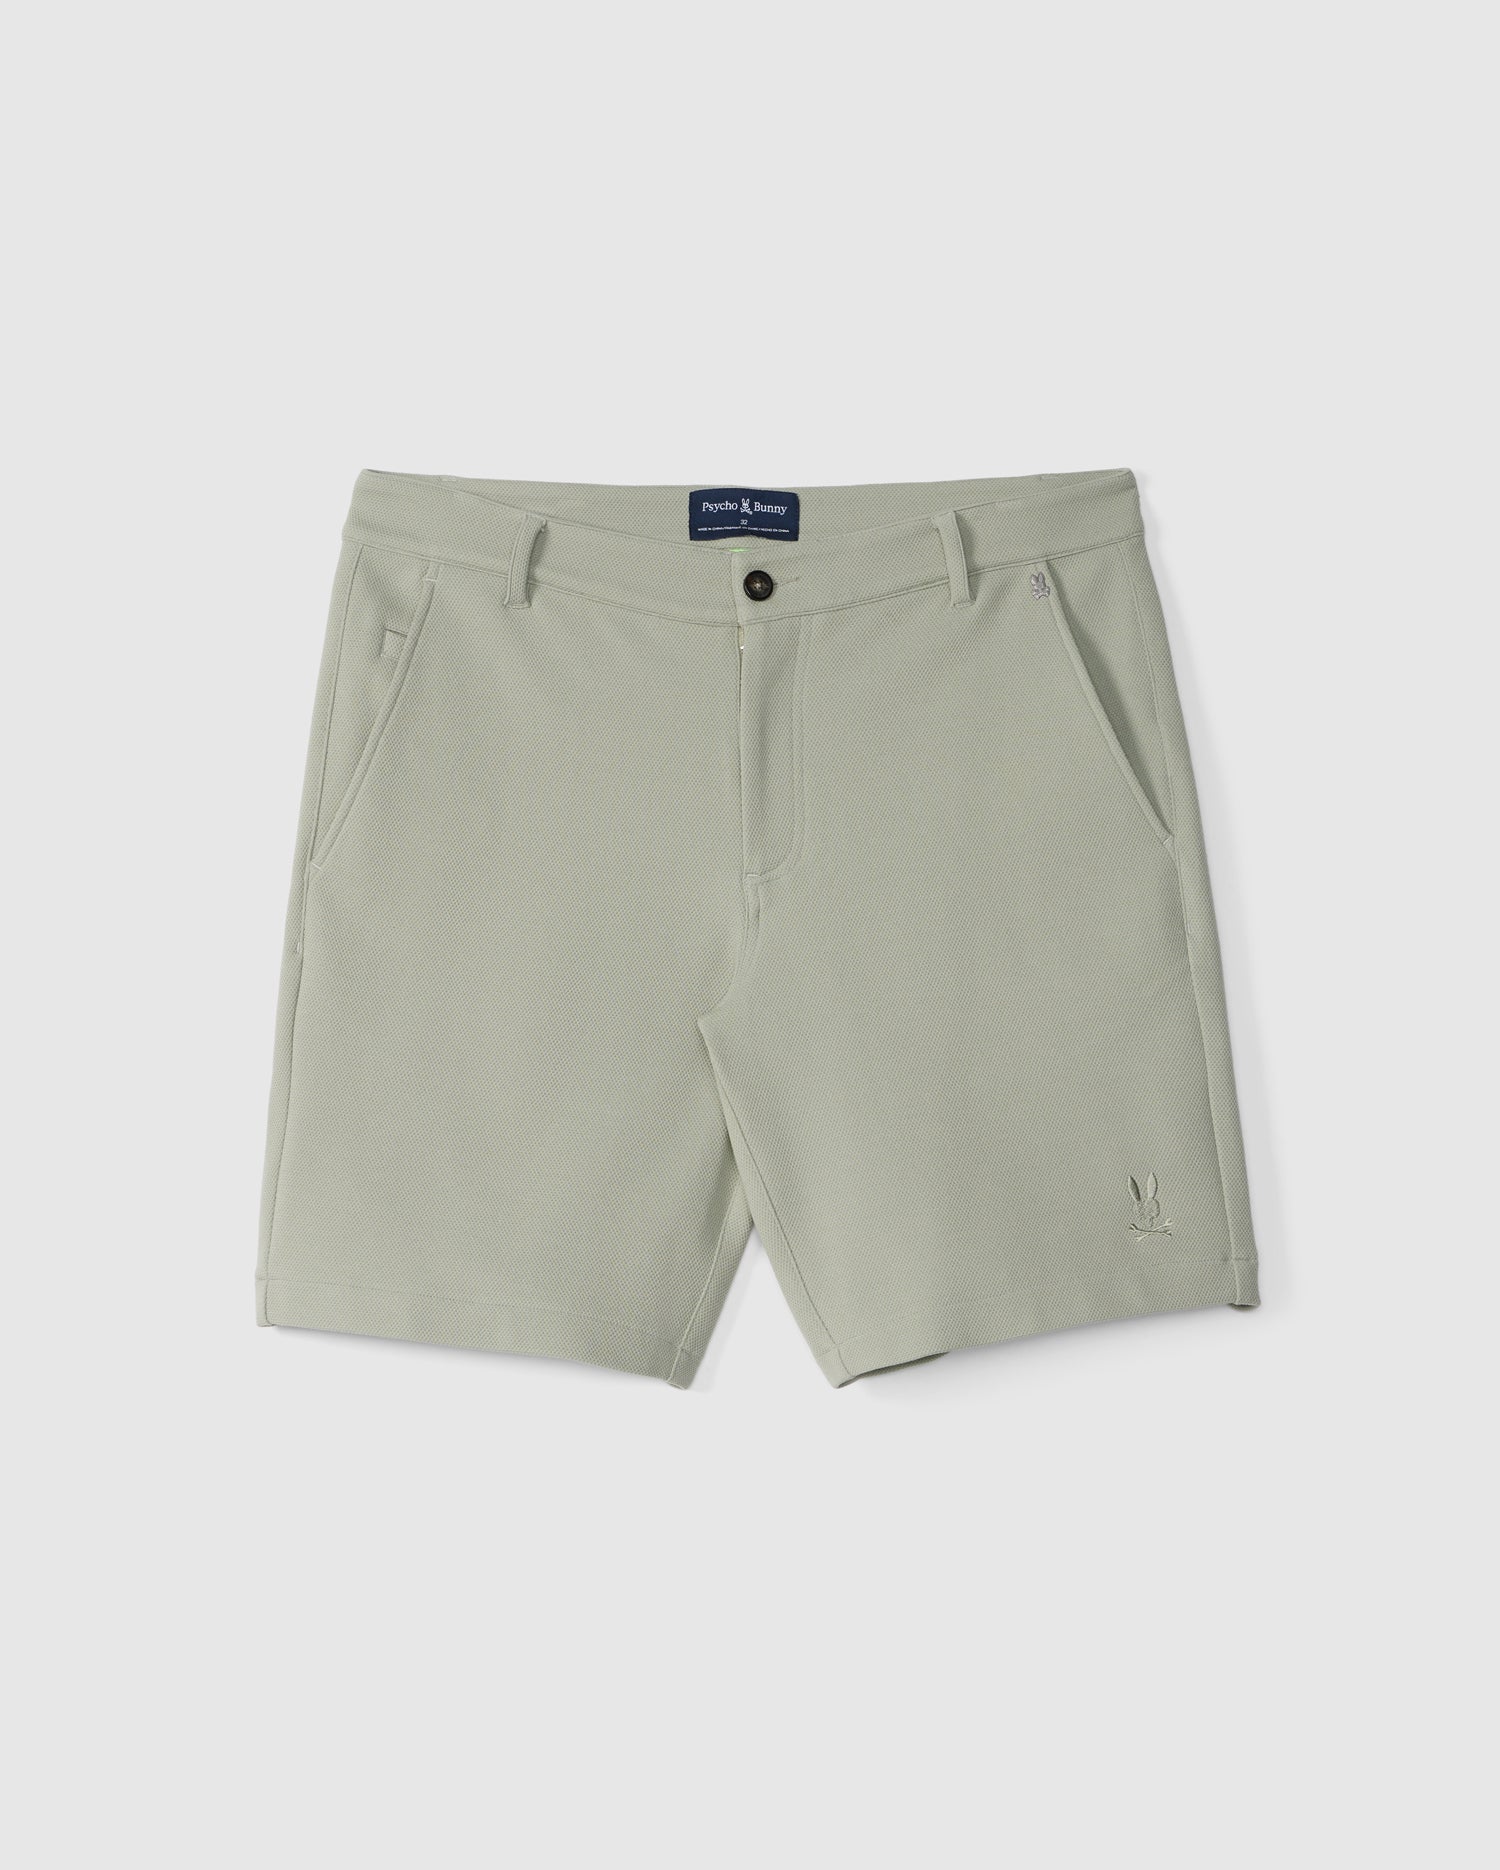 Light green, flat-front Men's Shiro Knit Honeycomb Shorts with belt loops and a button closure, displayed on a white background. Made from sweat-wicking honeycomb fabric, the shorts feature side pockets and a small Psycho Bunny logo embroidery near the hem.